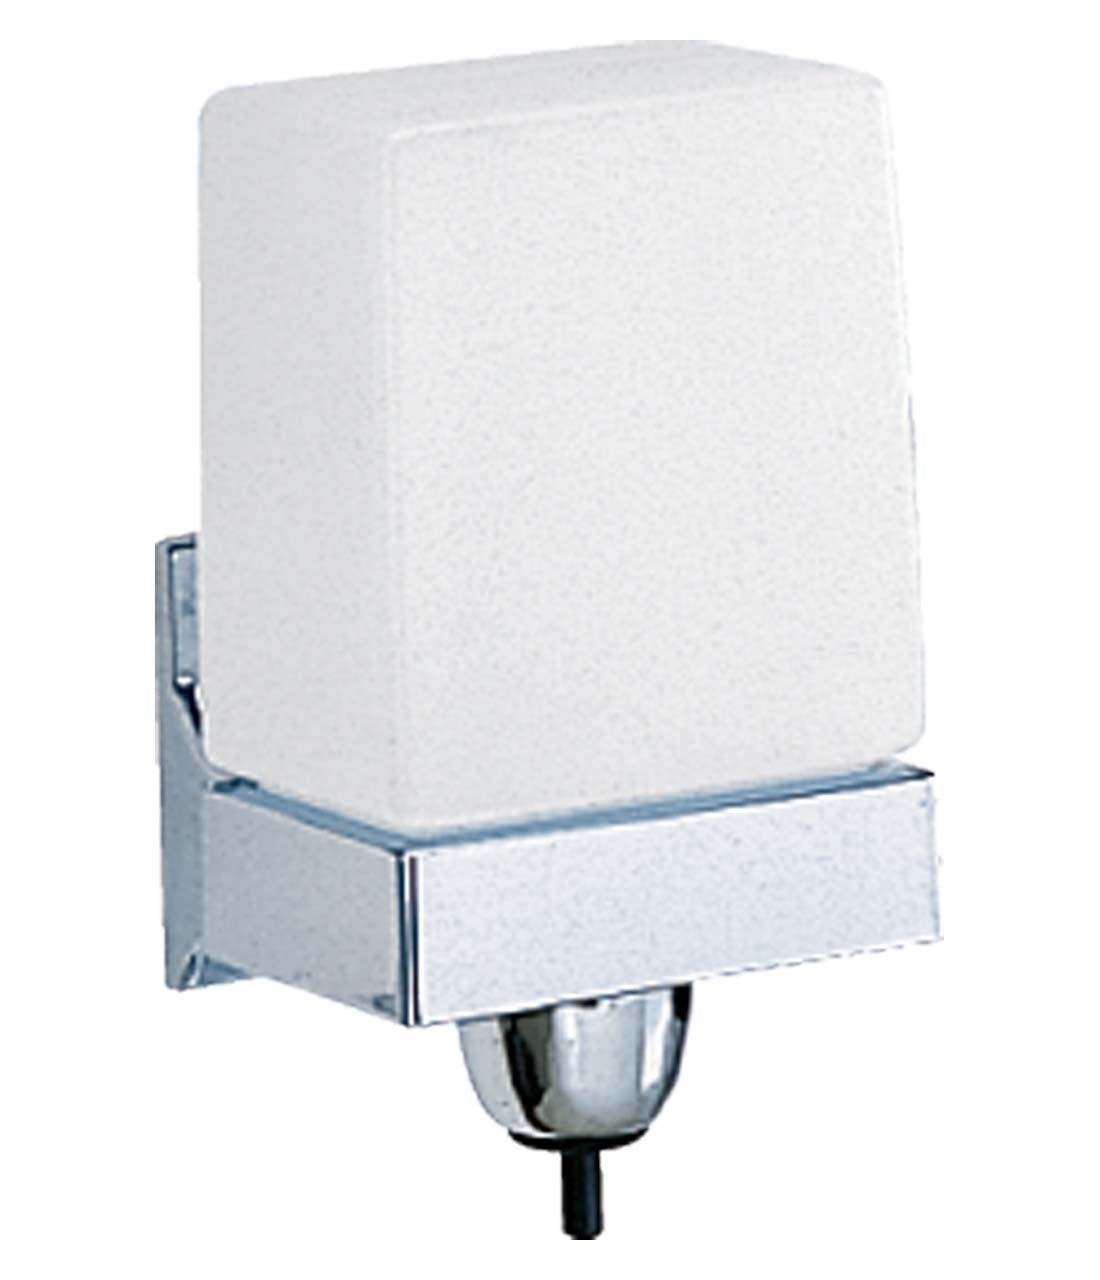 The Bobrick B-155 is a LiquidMate wall-mounted soap dispenser with a 24-fl oz capacity.